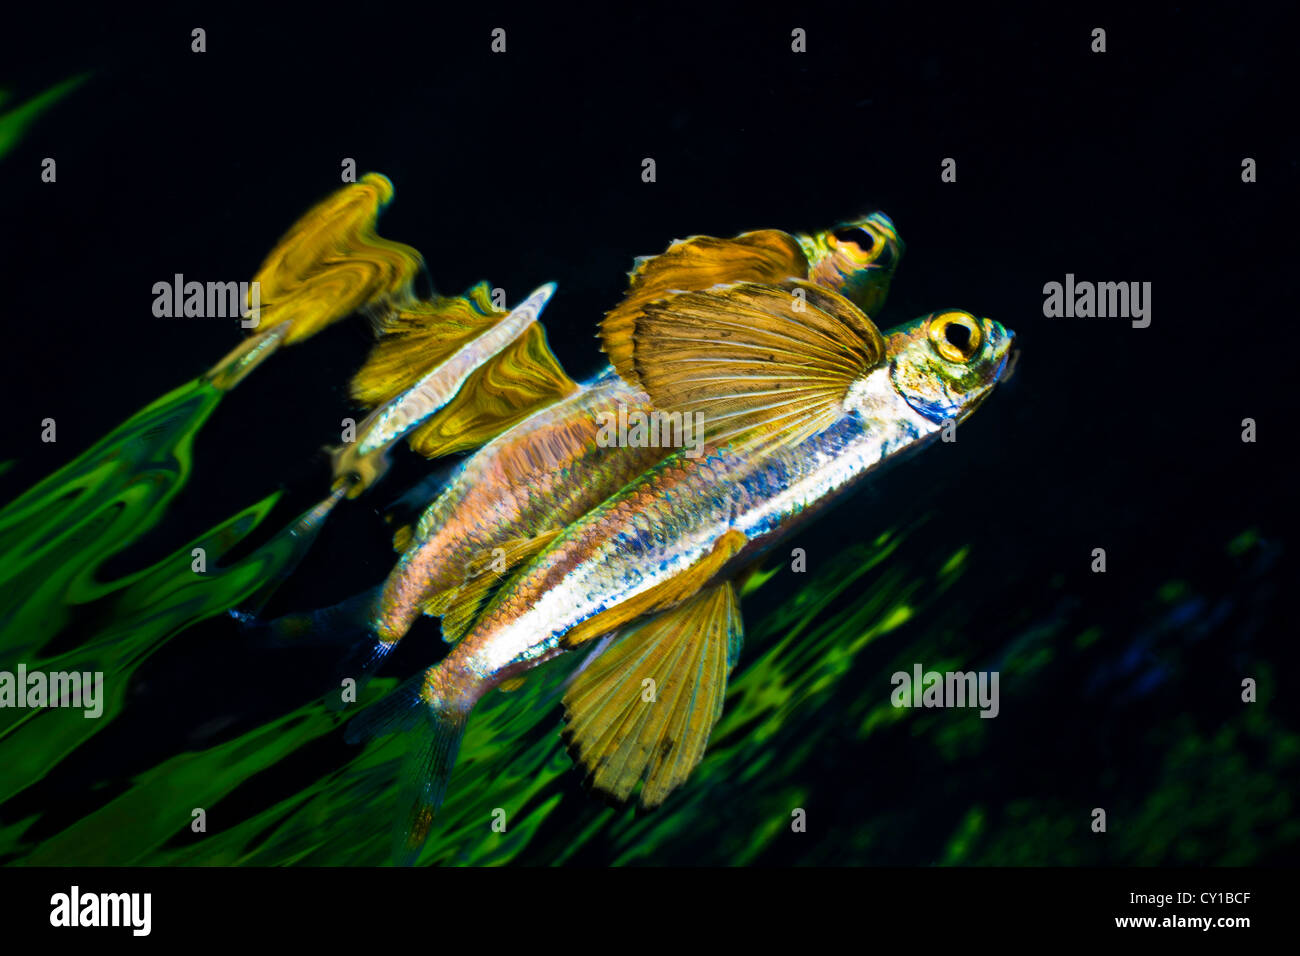 Flying Fish near Water Surface, Exocetus sp., Ambon, Moluccas, Indonesia Stock Photo